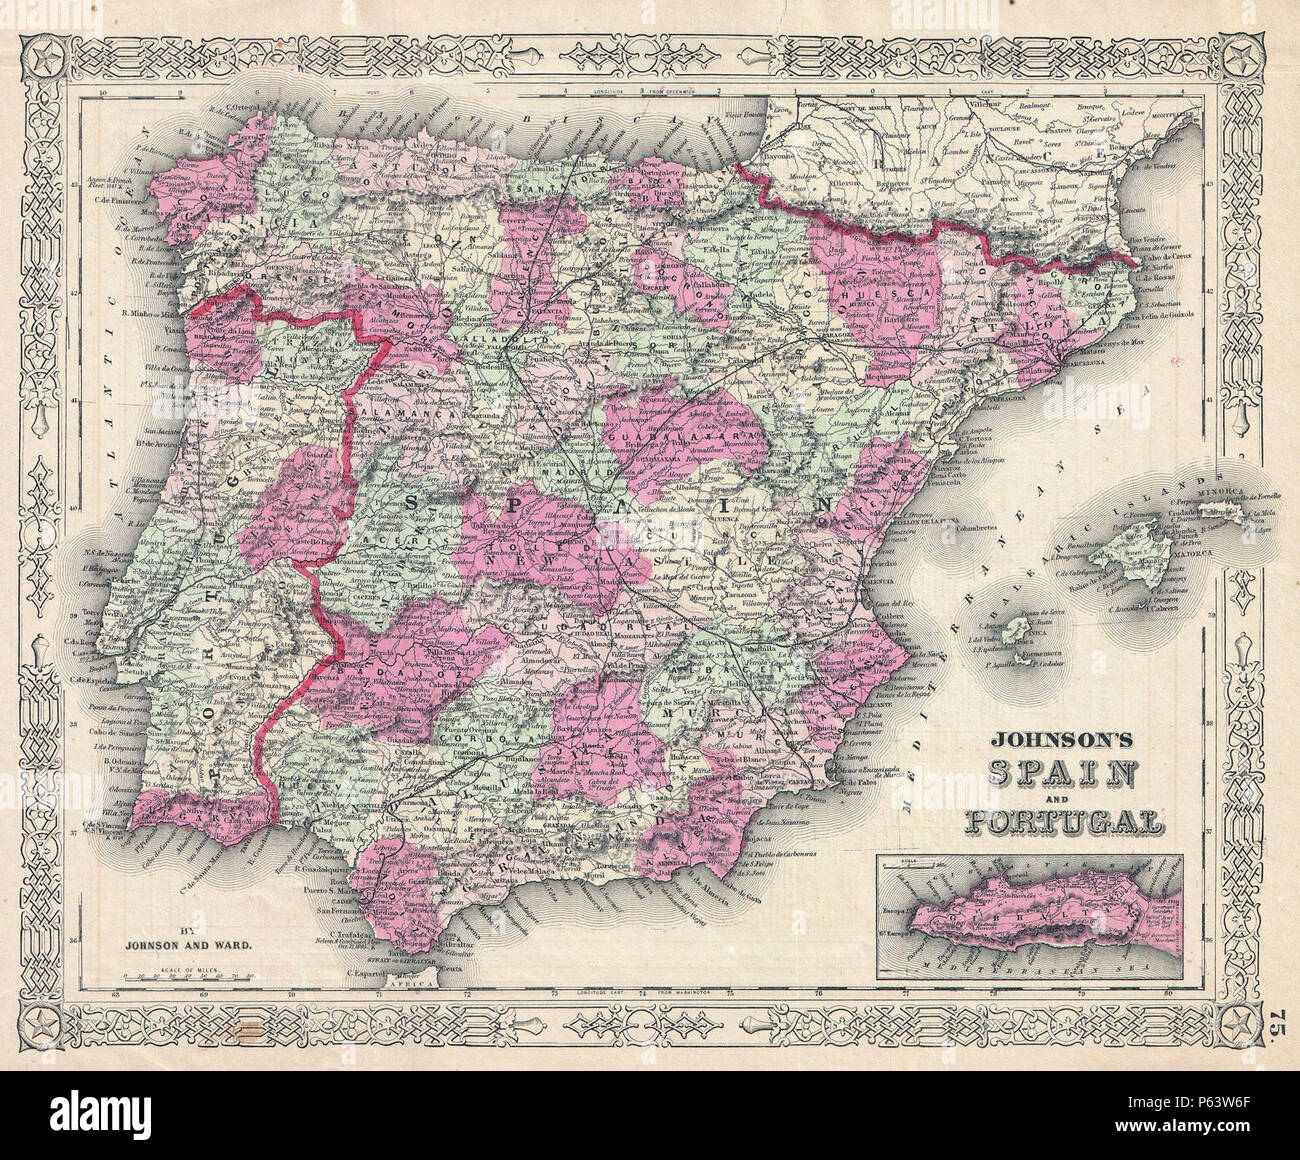 1864 Johnson Map of Spain and Portugal - Geographicus - SpainPortugal-johnson-1864. Stock Photo